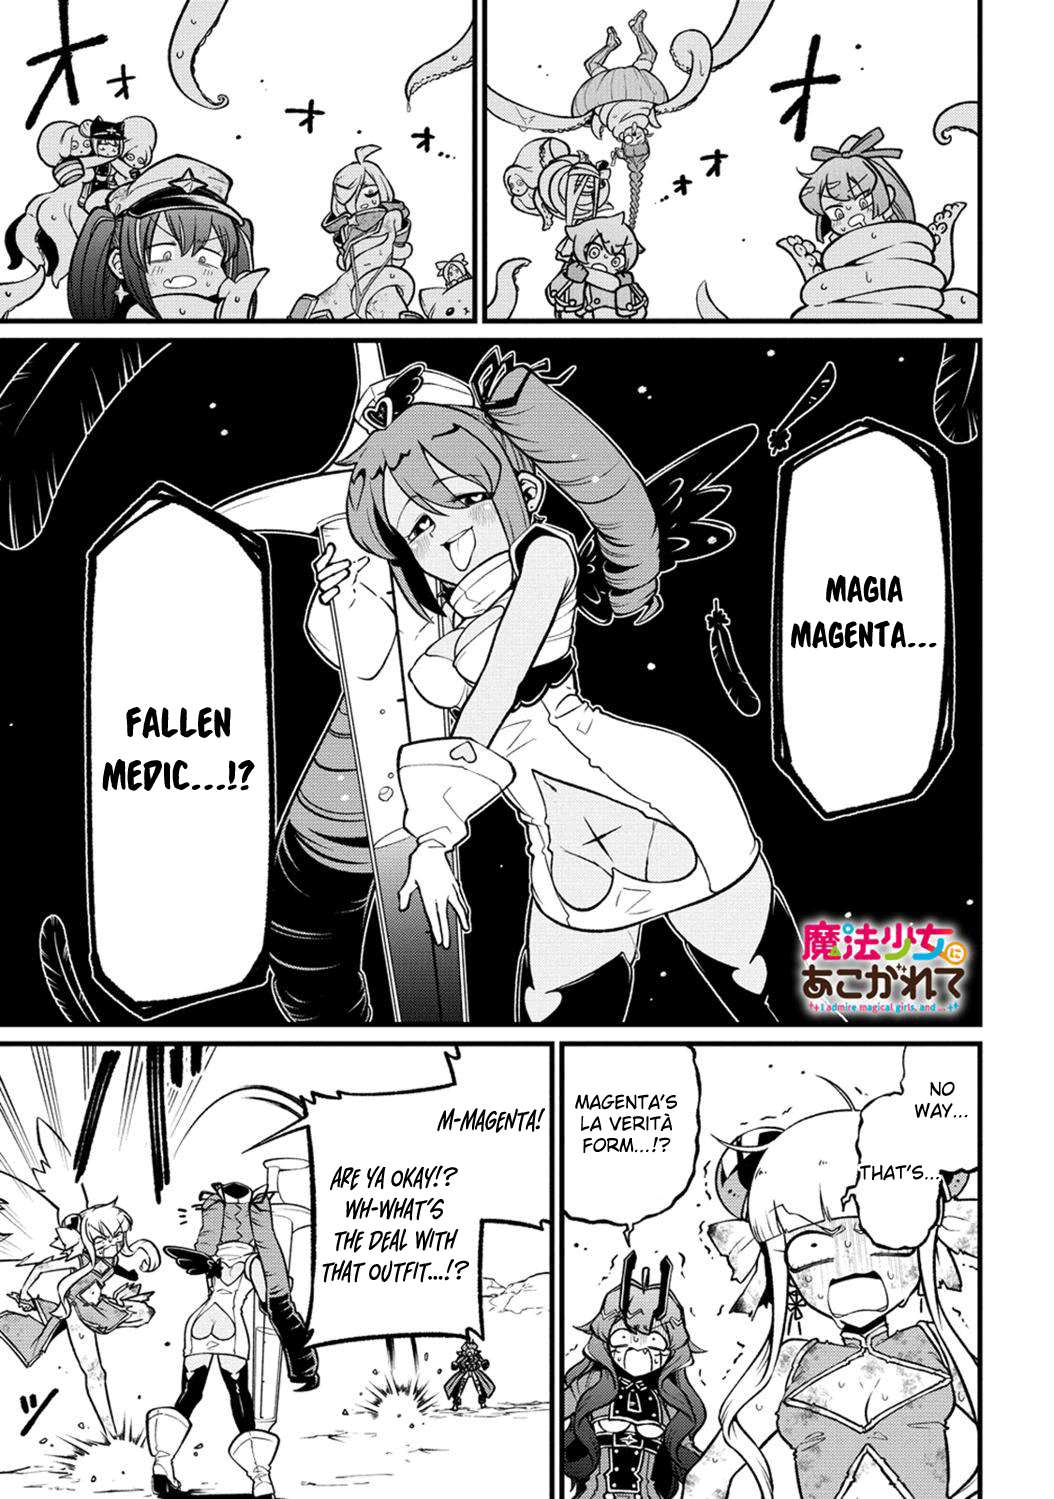 Looking up to Magical Girls - chapter 52 - #1